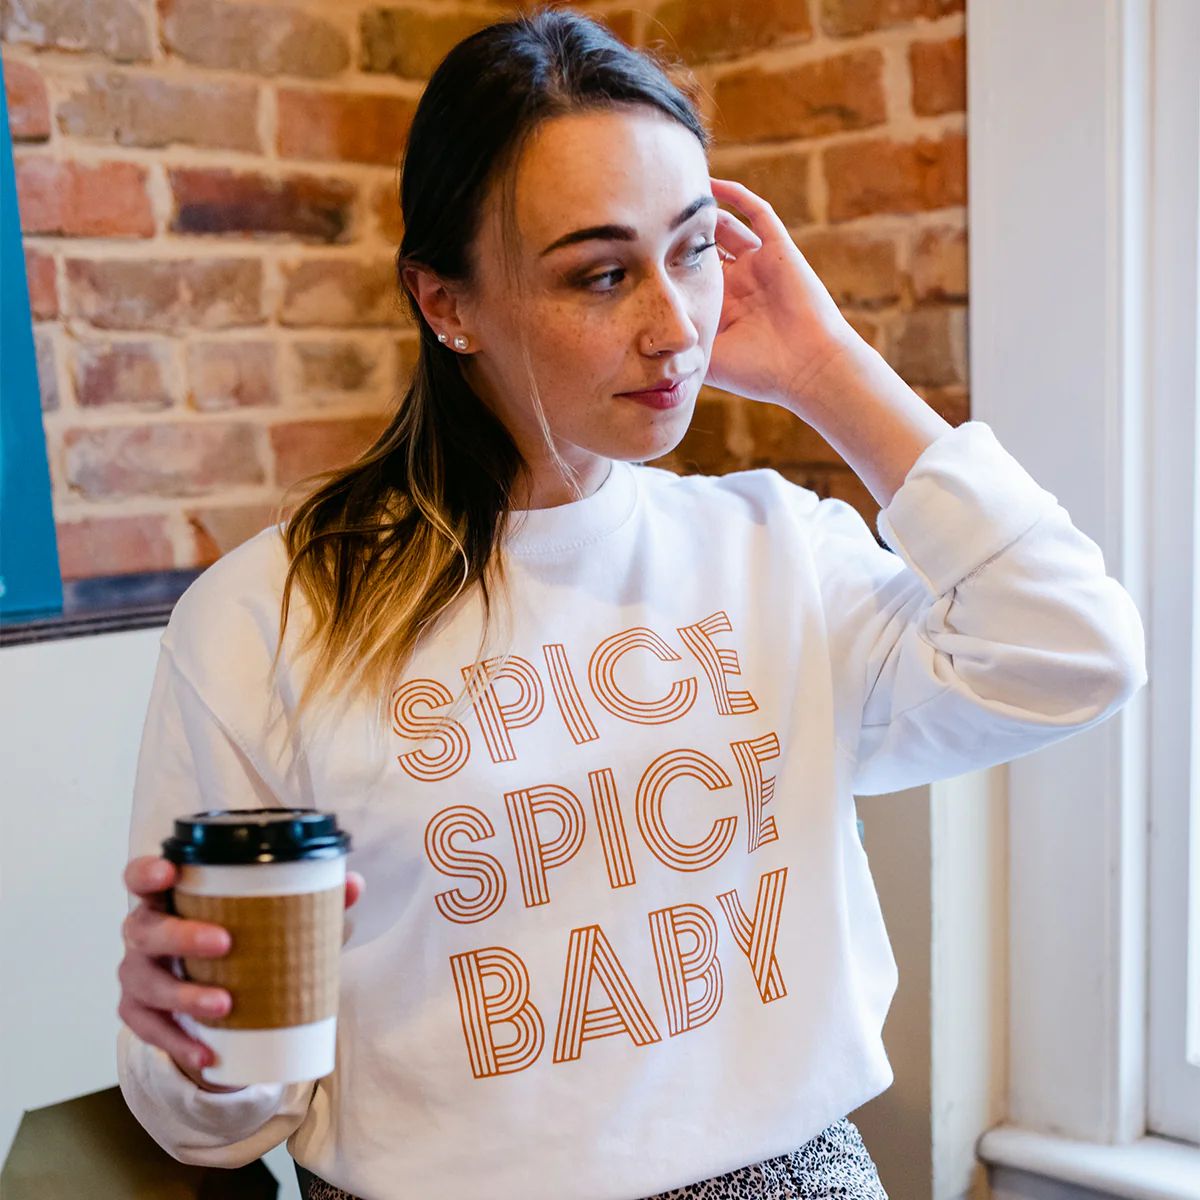 Spice Spice Baby | Ivy + Cloth